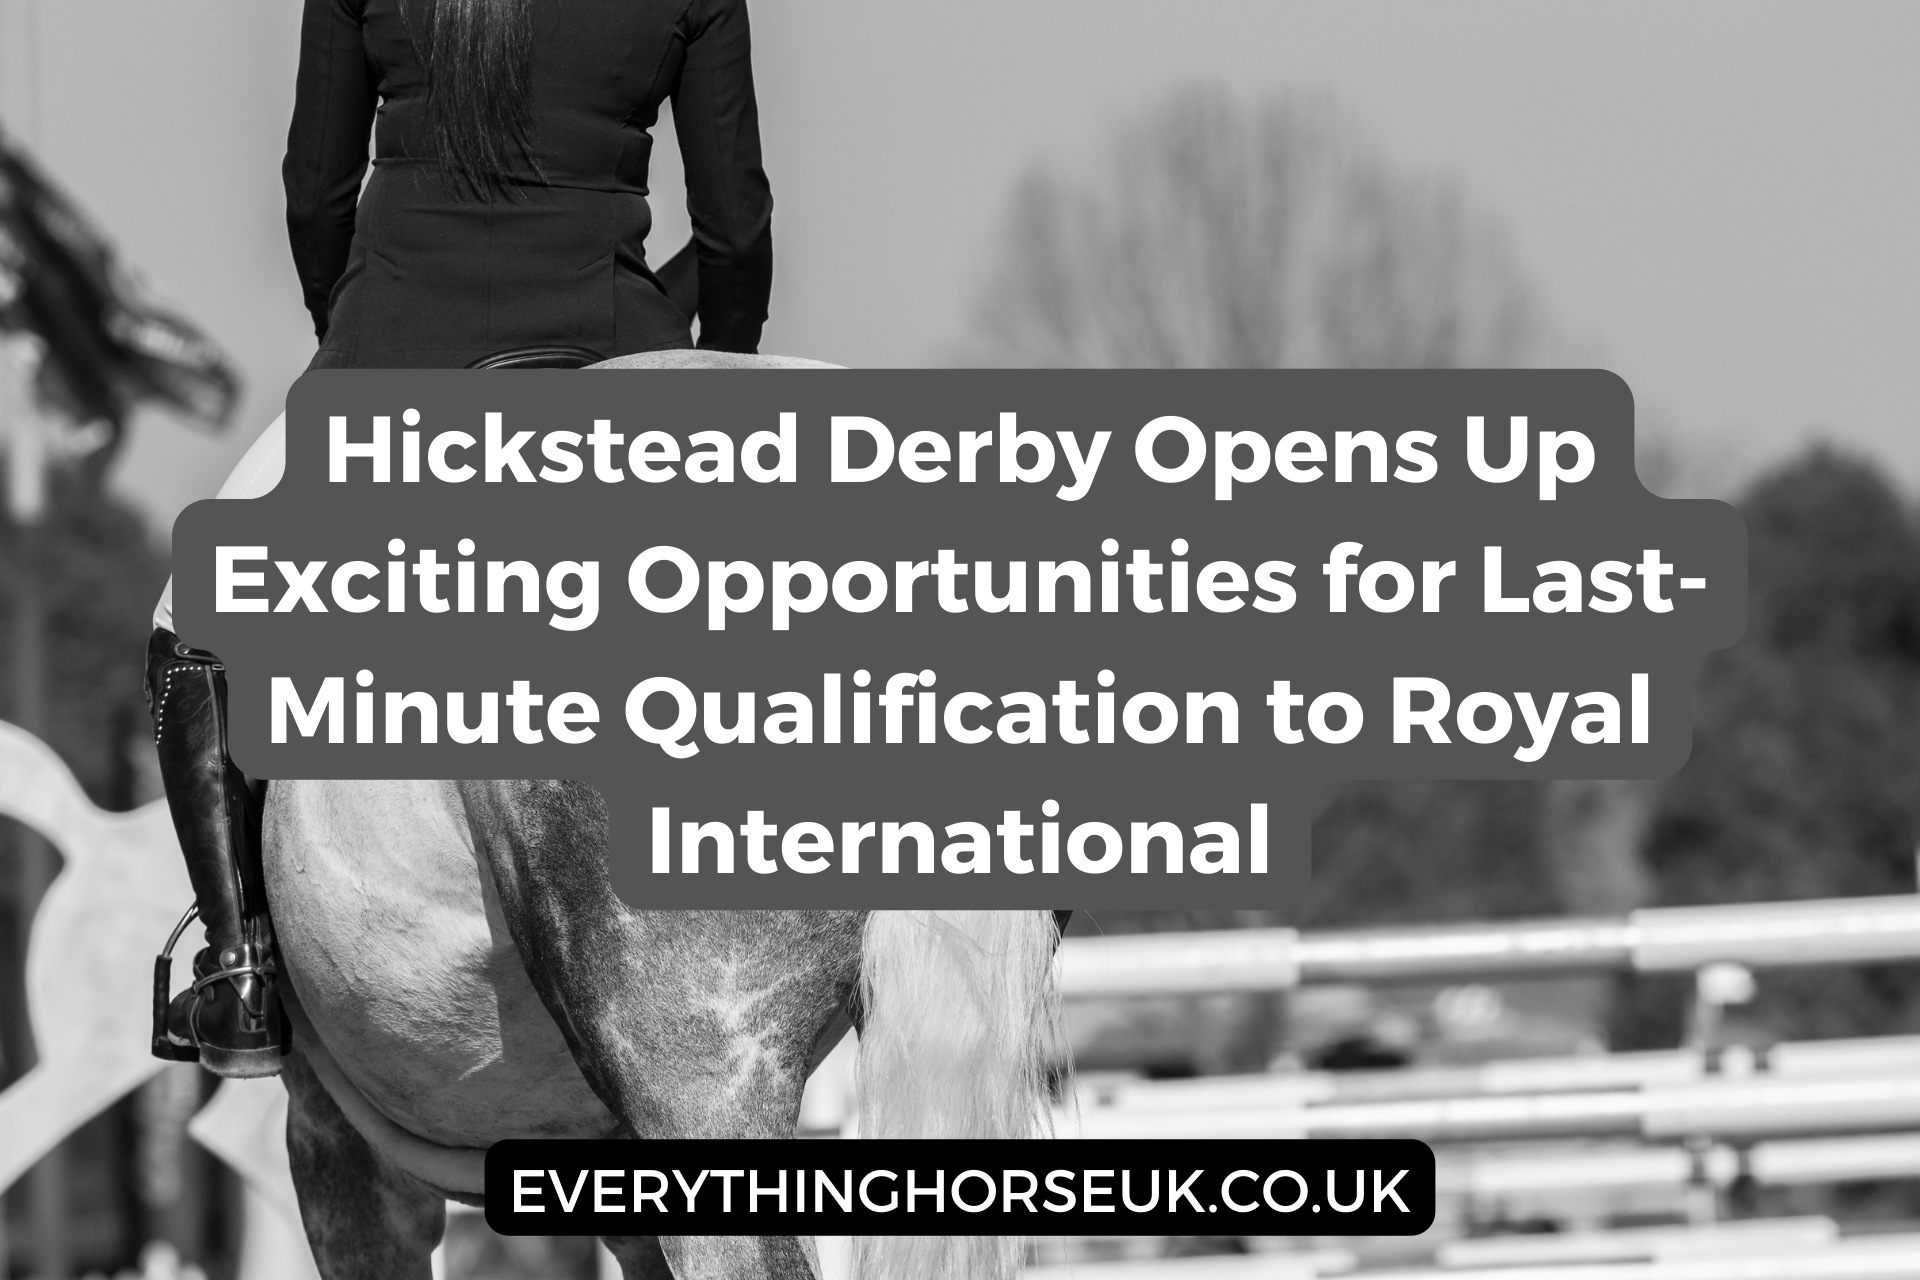 Hickstead Derby Opens Up Exciting Opportunities for Last-Minute Qualification to Royal International